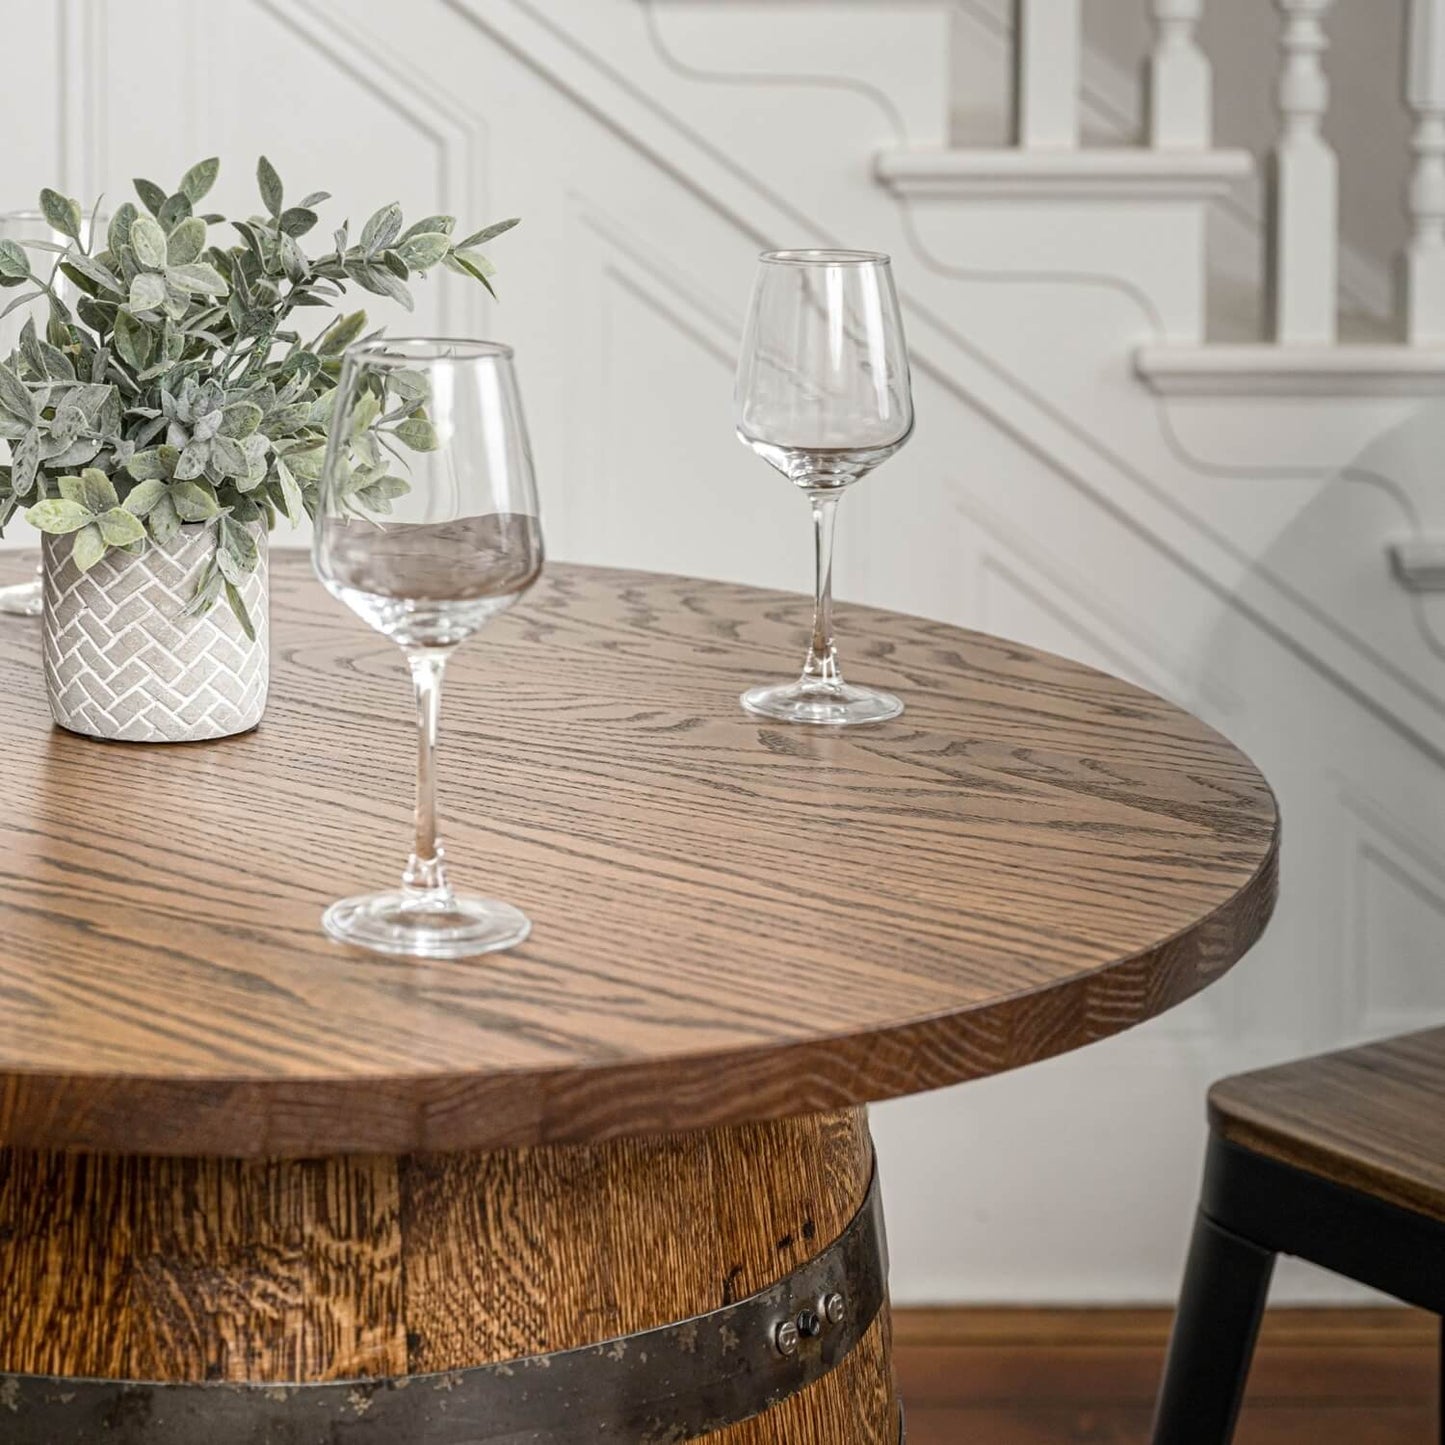 Special Offer: Personalized Whiskey Barrel Pub Table Set w/ 36" Oak Top, 4 Stools, and Free Delivery